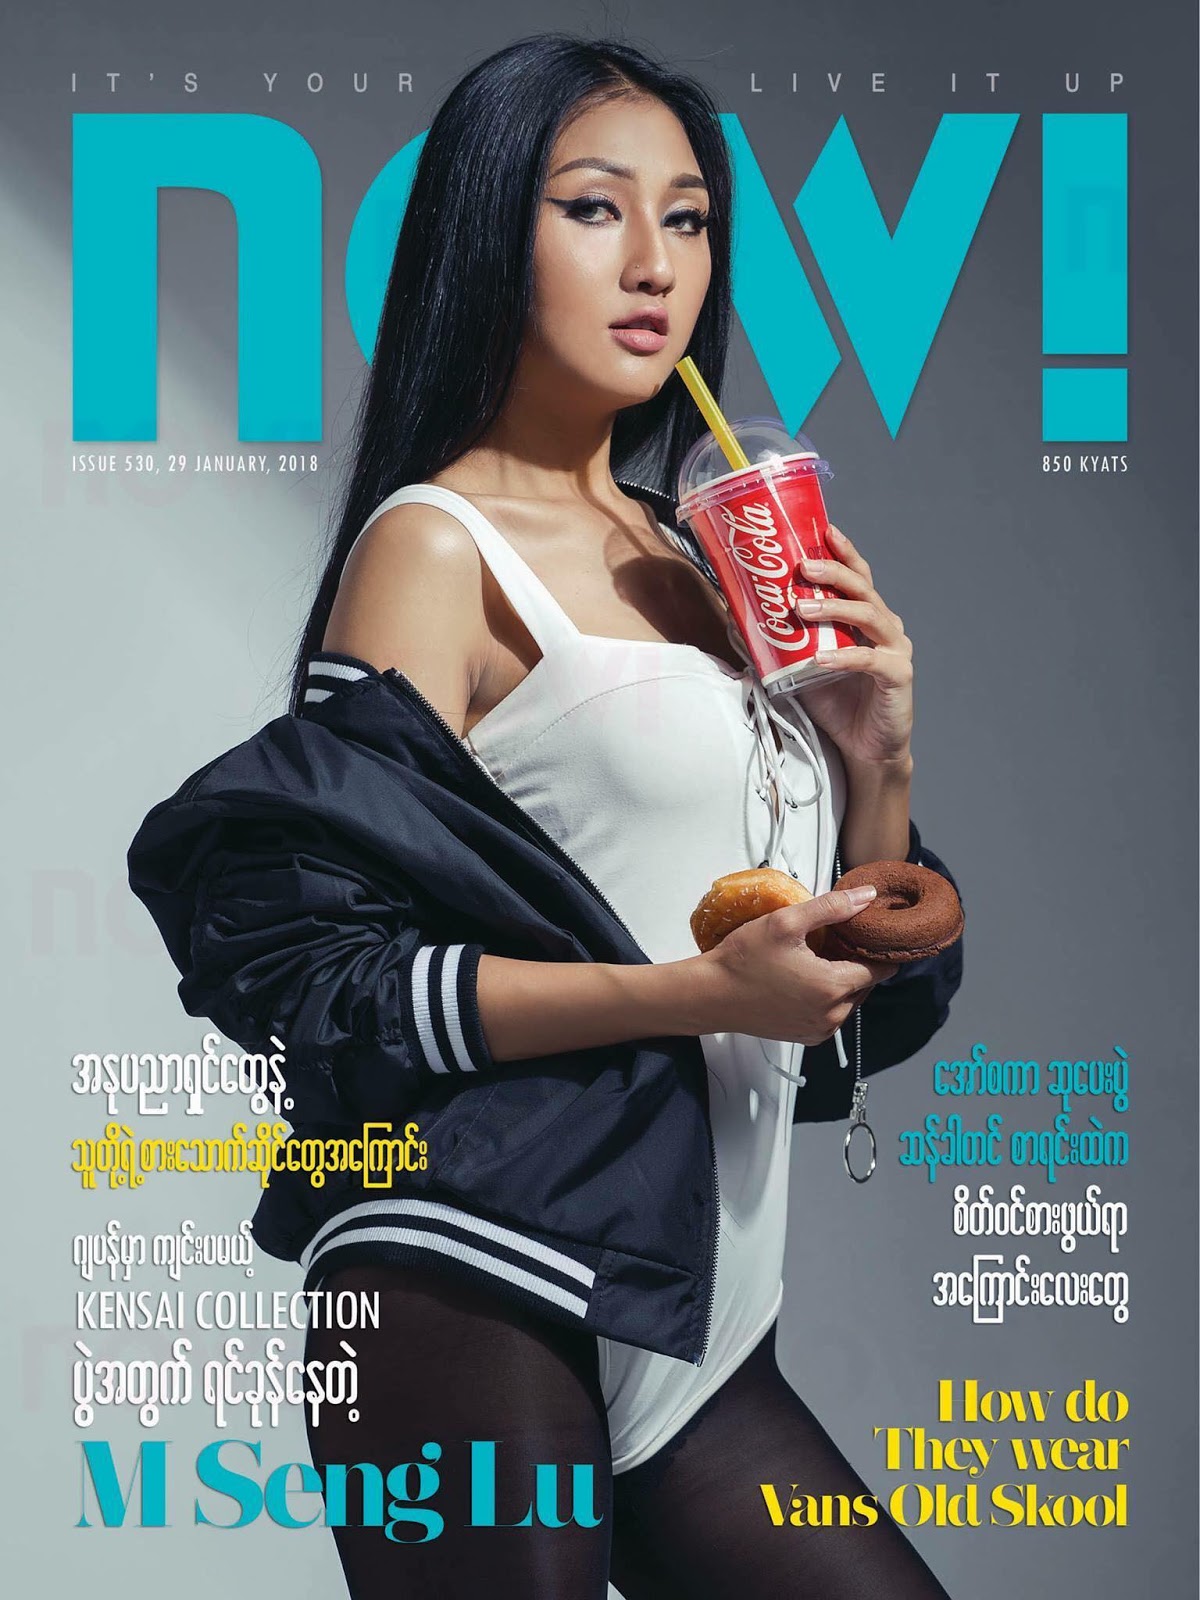 M Seng Lu - Now Magazine Cover Photoshoot and Interview